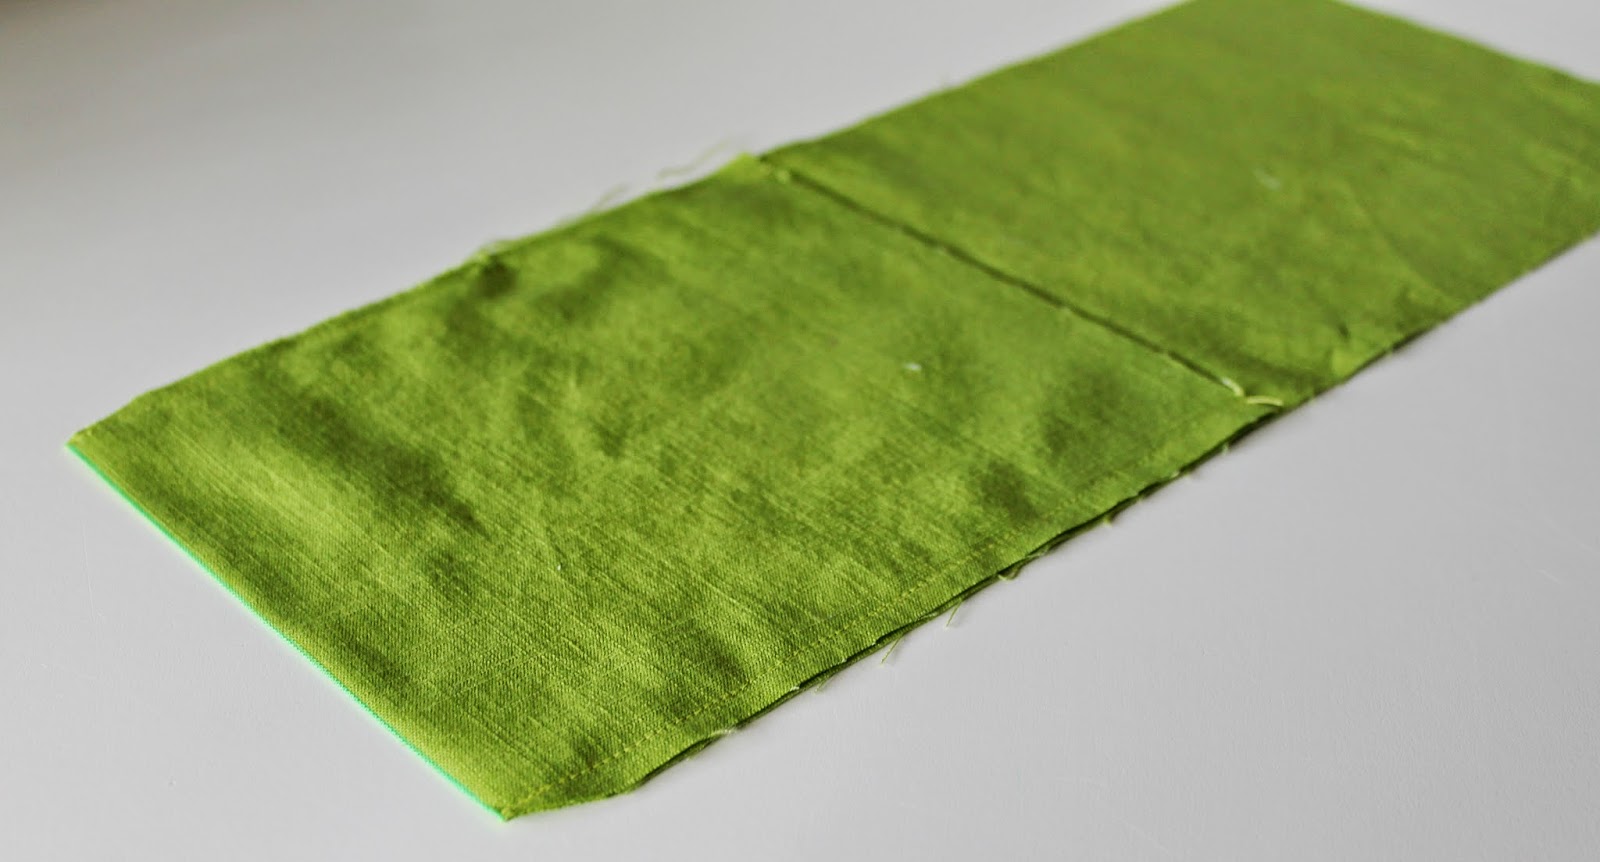 Prop-Up Tablet Case | Step-by-step directions how to sew an envelope case, custom fit to cover ANY size tablet with a prop-up stand built right into the flap. | The Inspired Wren